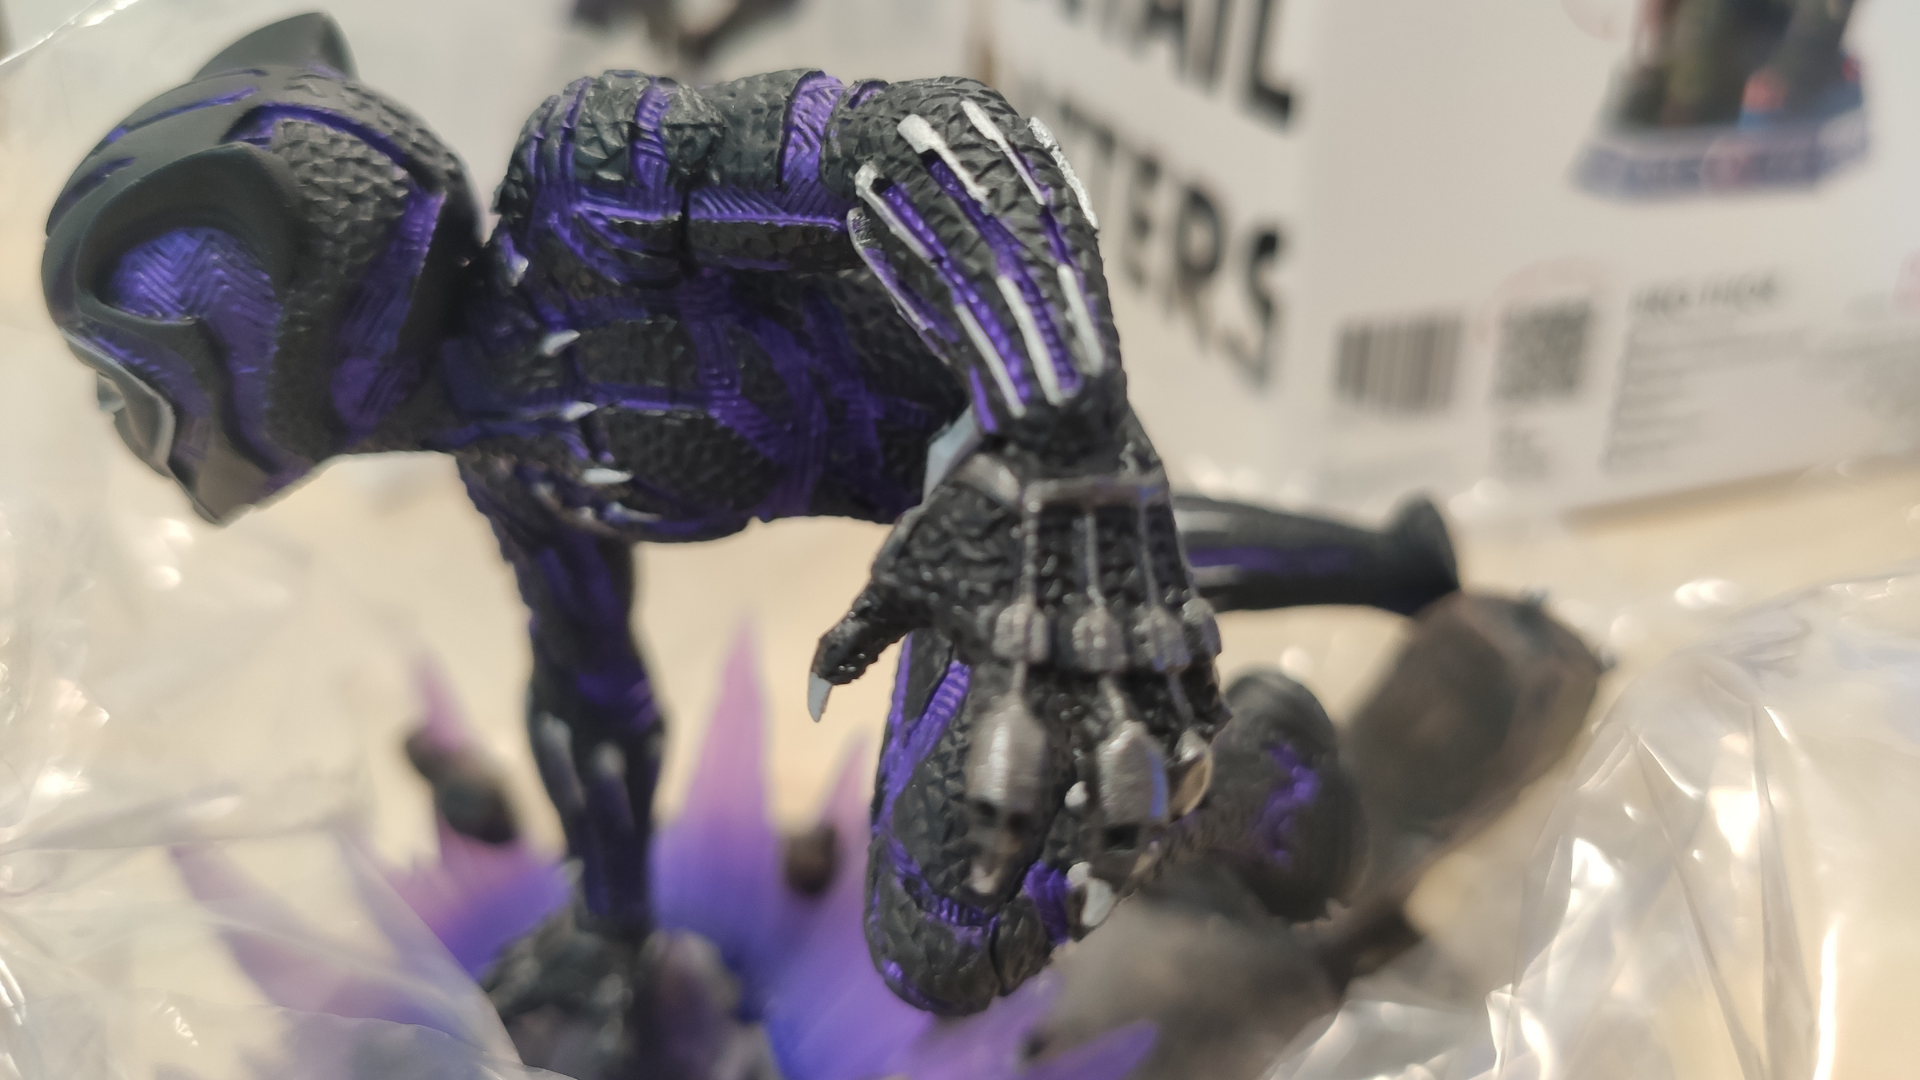 side-and-hand-details-of-toylaxy-marvel-avenger-4-end-game-wave3-black-panther-figure